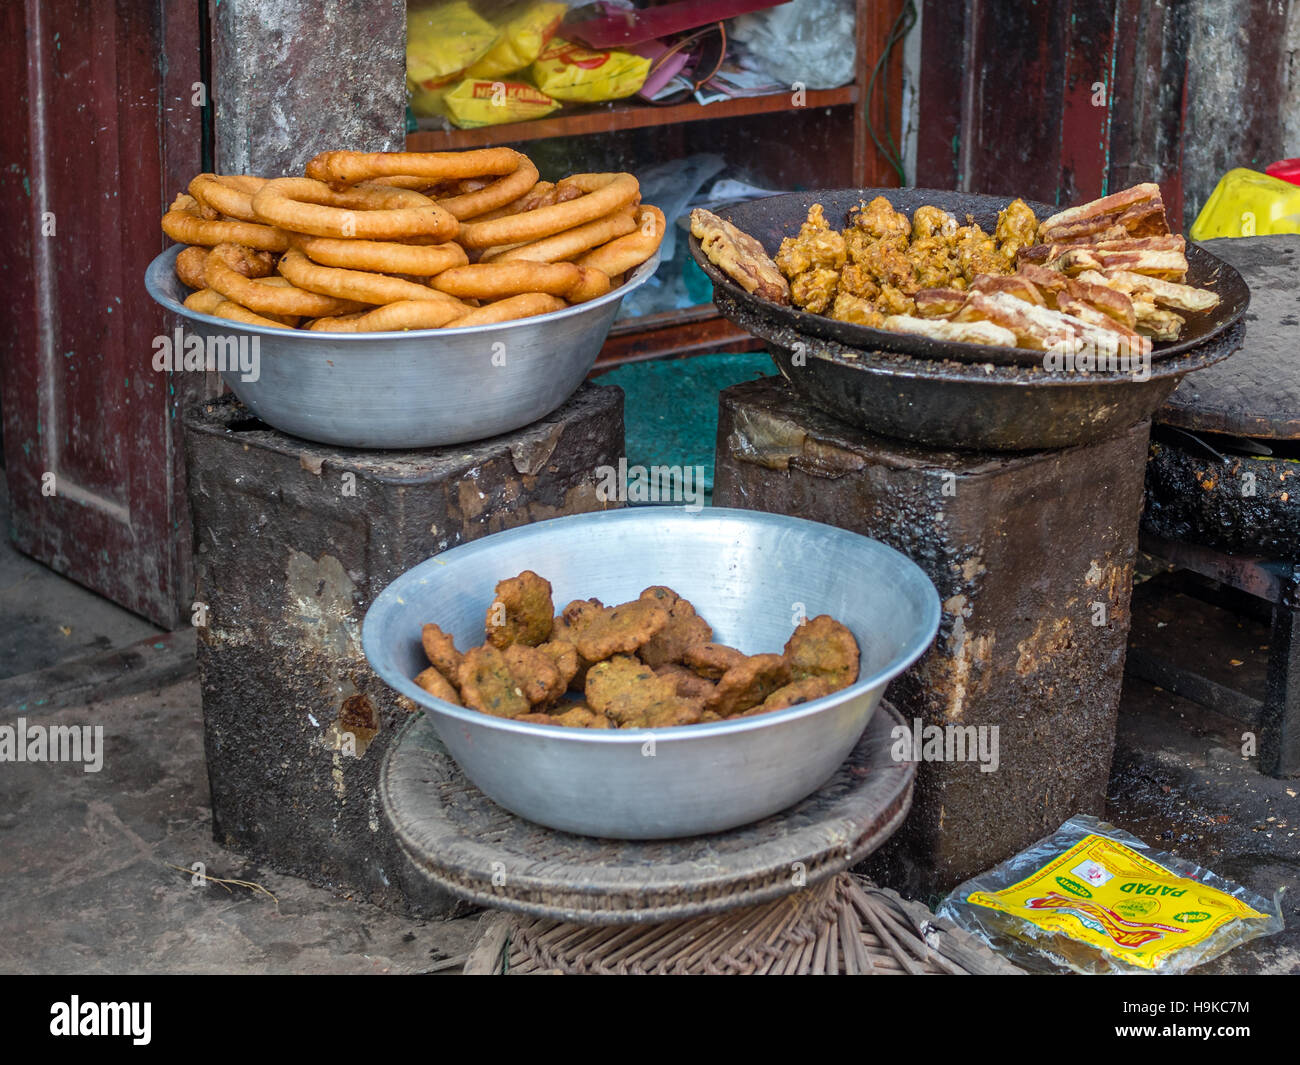 3 bowls of fried street food in Nepal Stock Photo